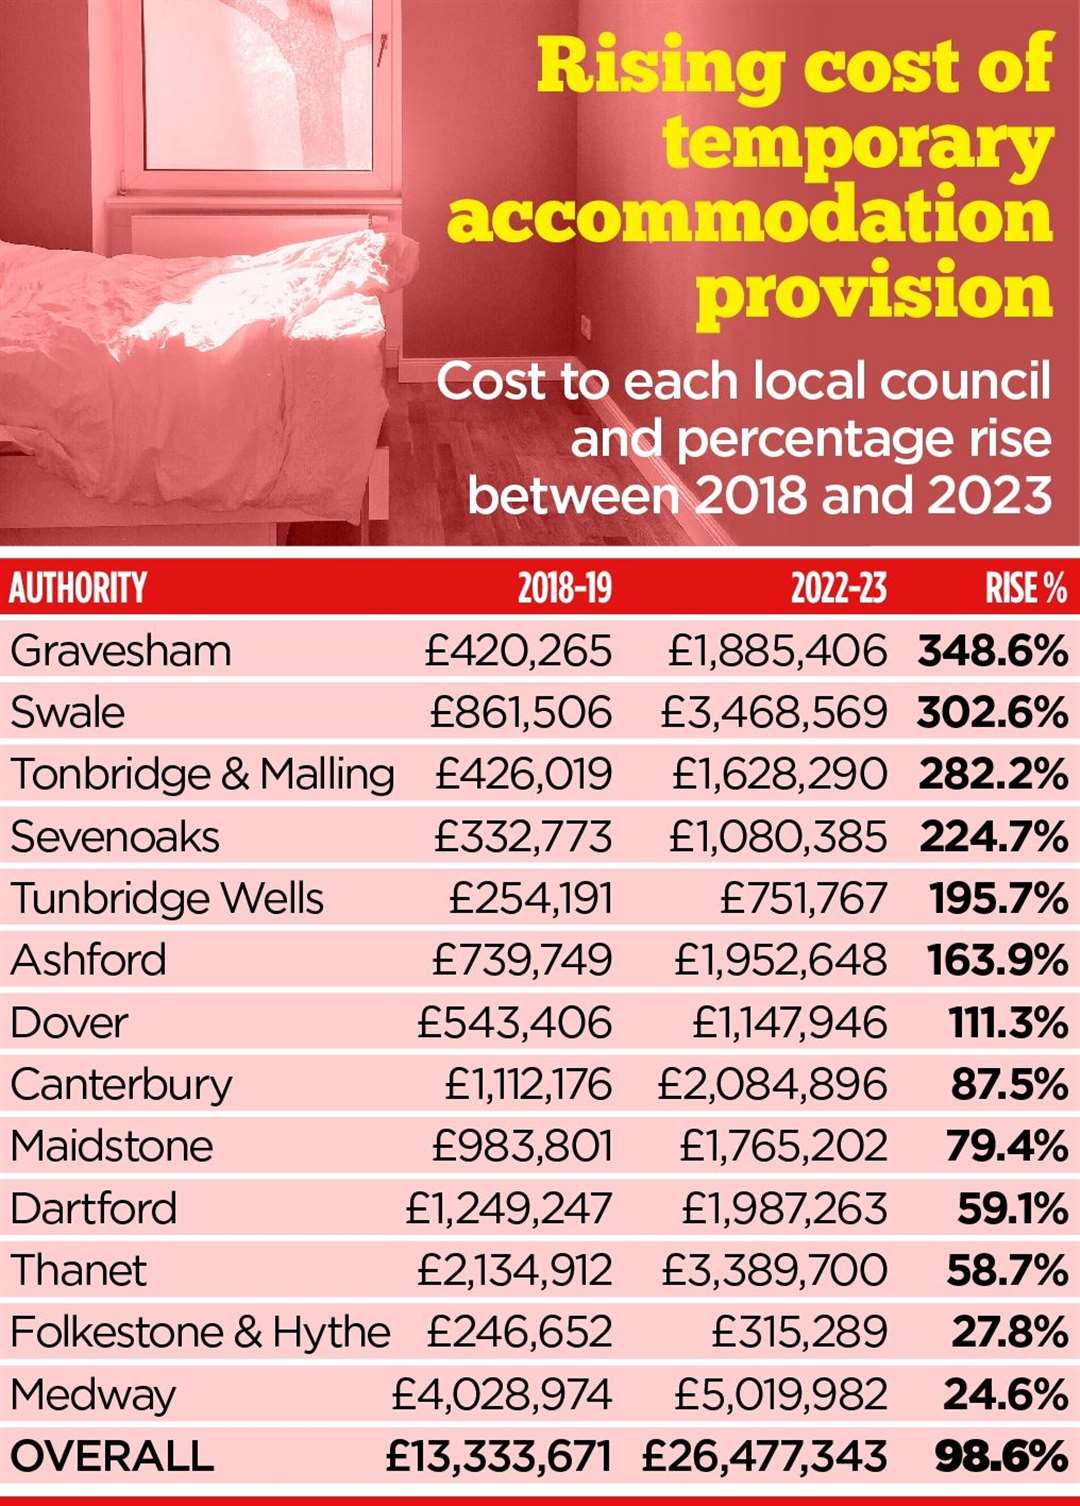 A graphic showing each Kent council's spending on temporary accommodation in 2018-19 and 2022-23